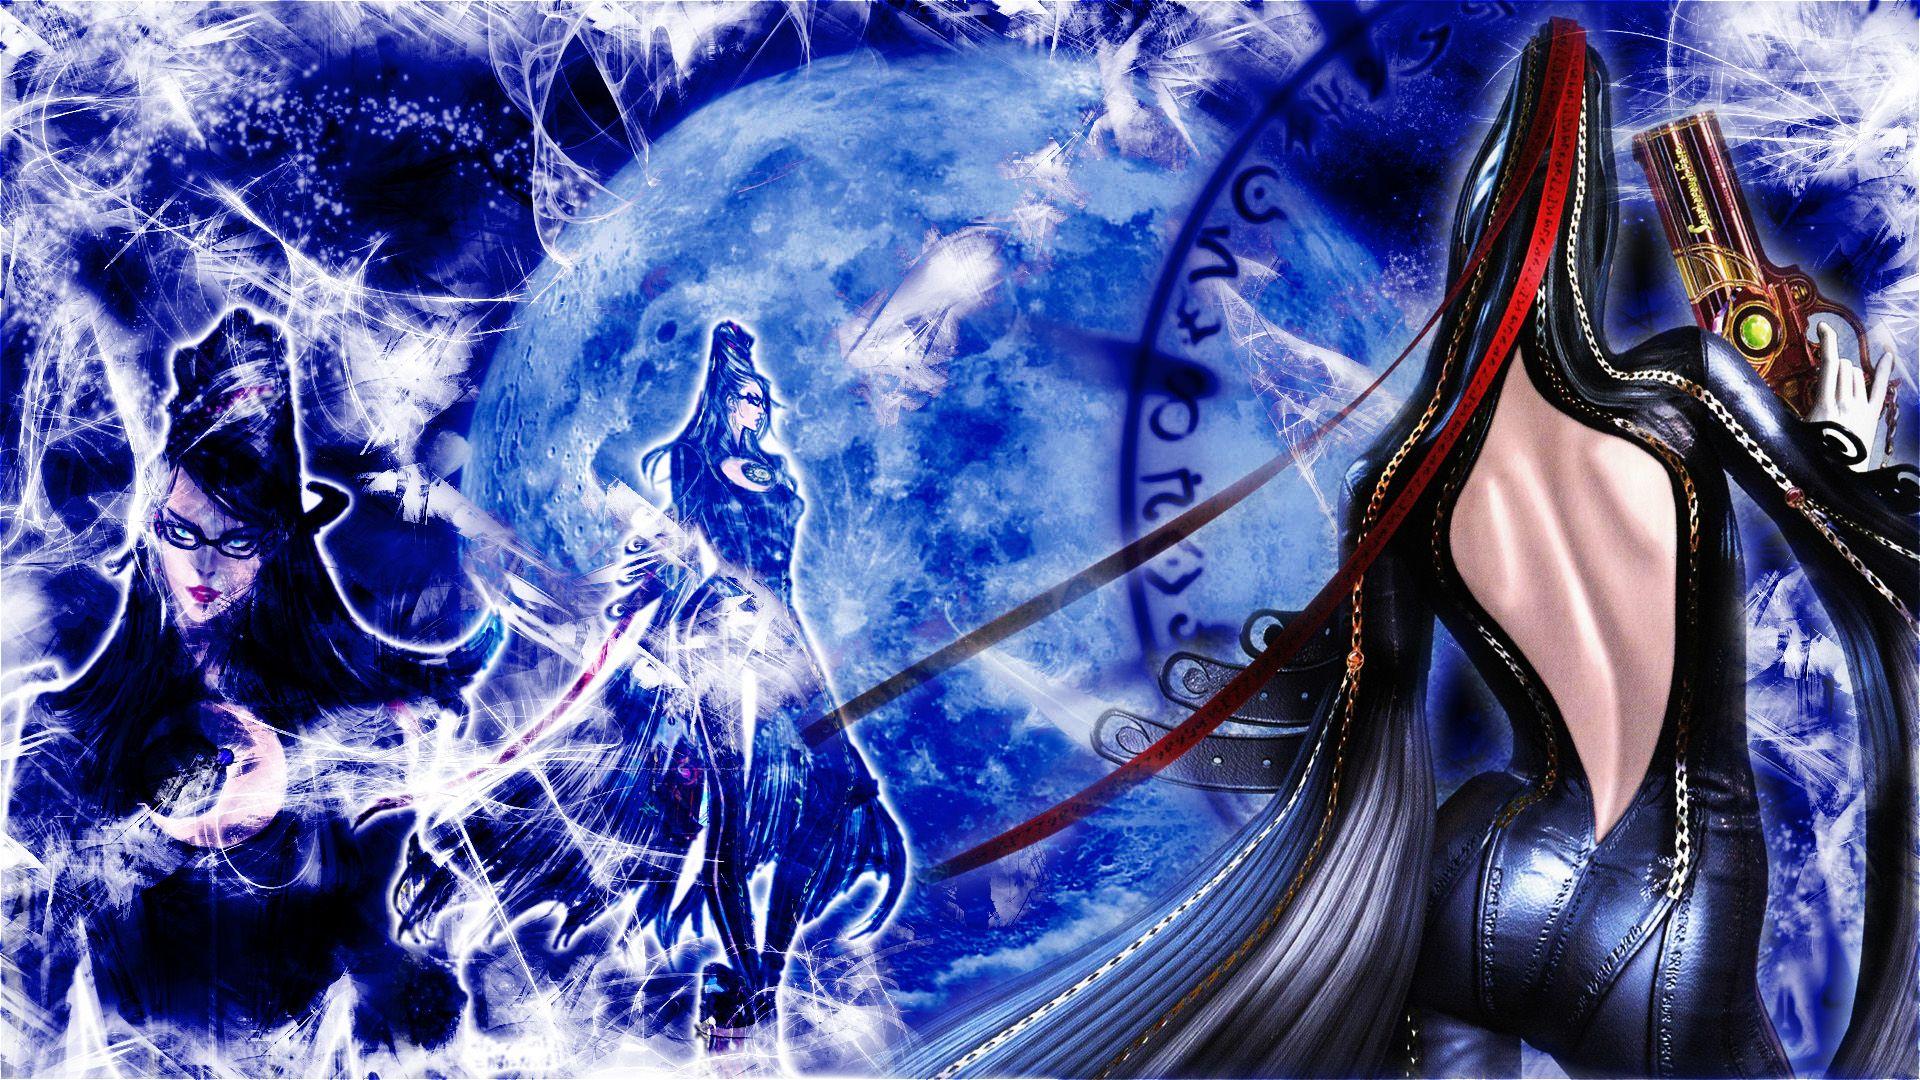 Bayonetta Wallpapers by Puppeteer